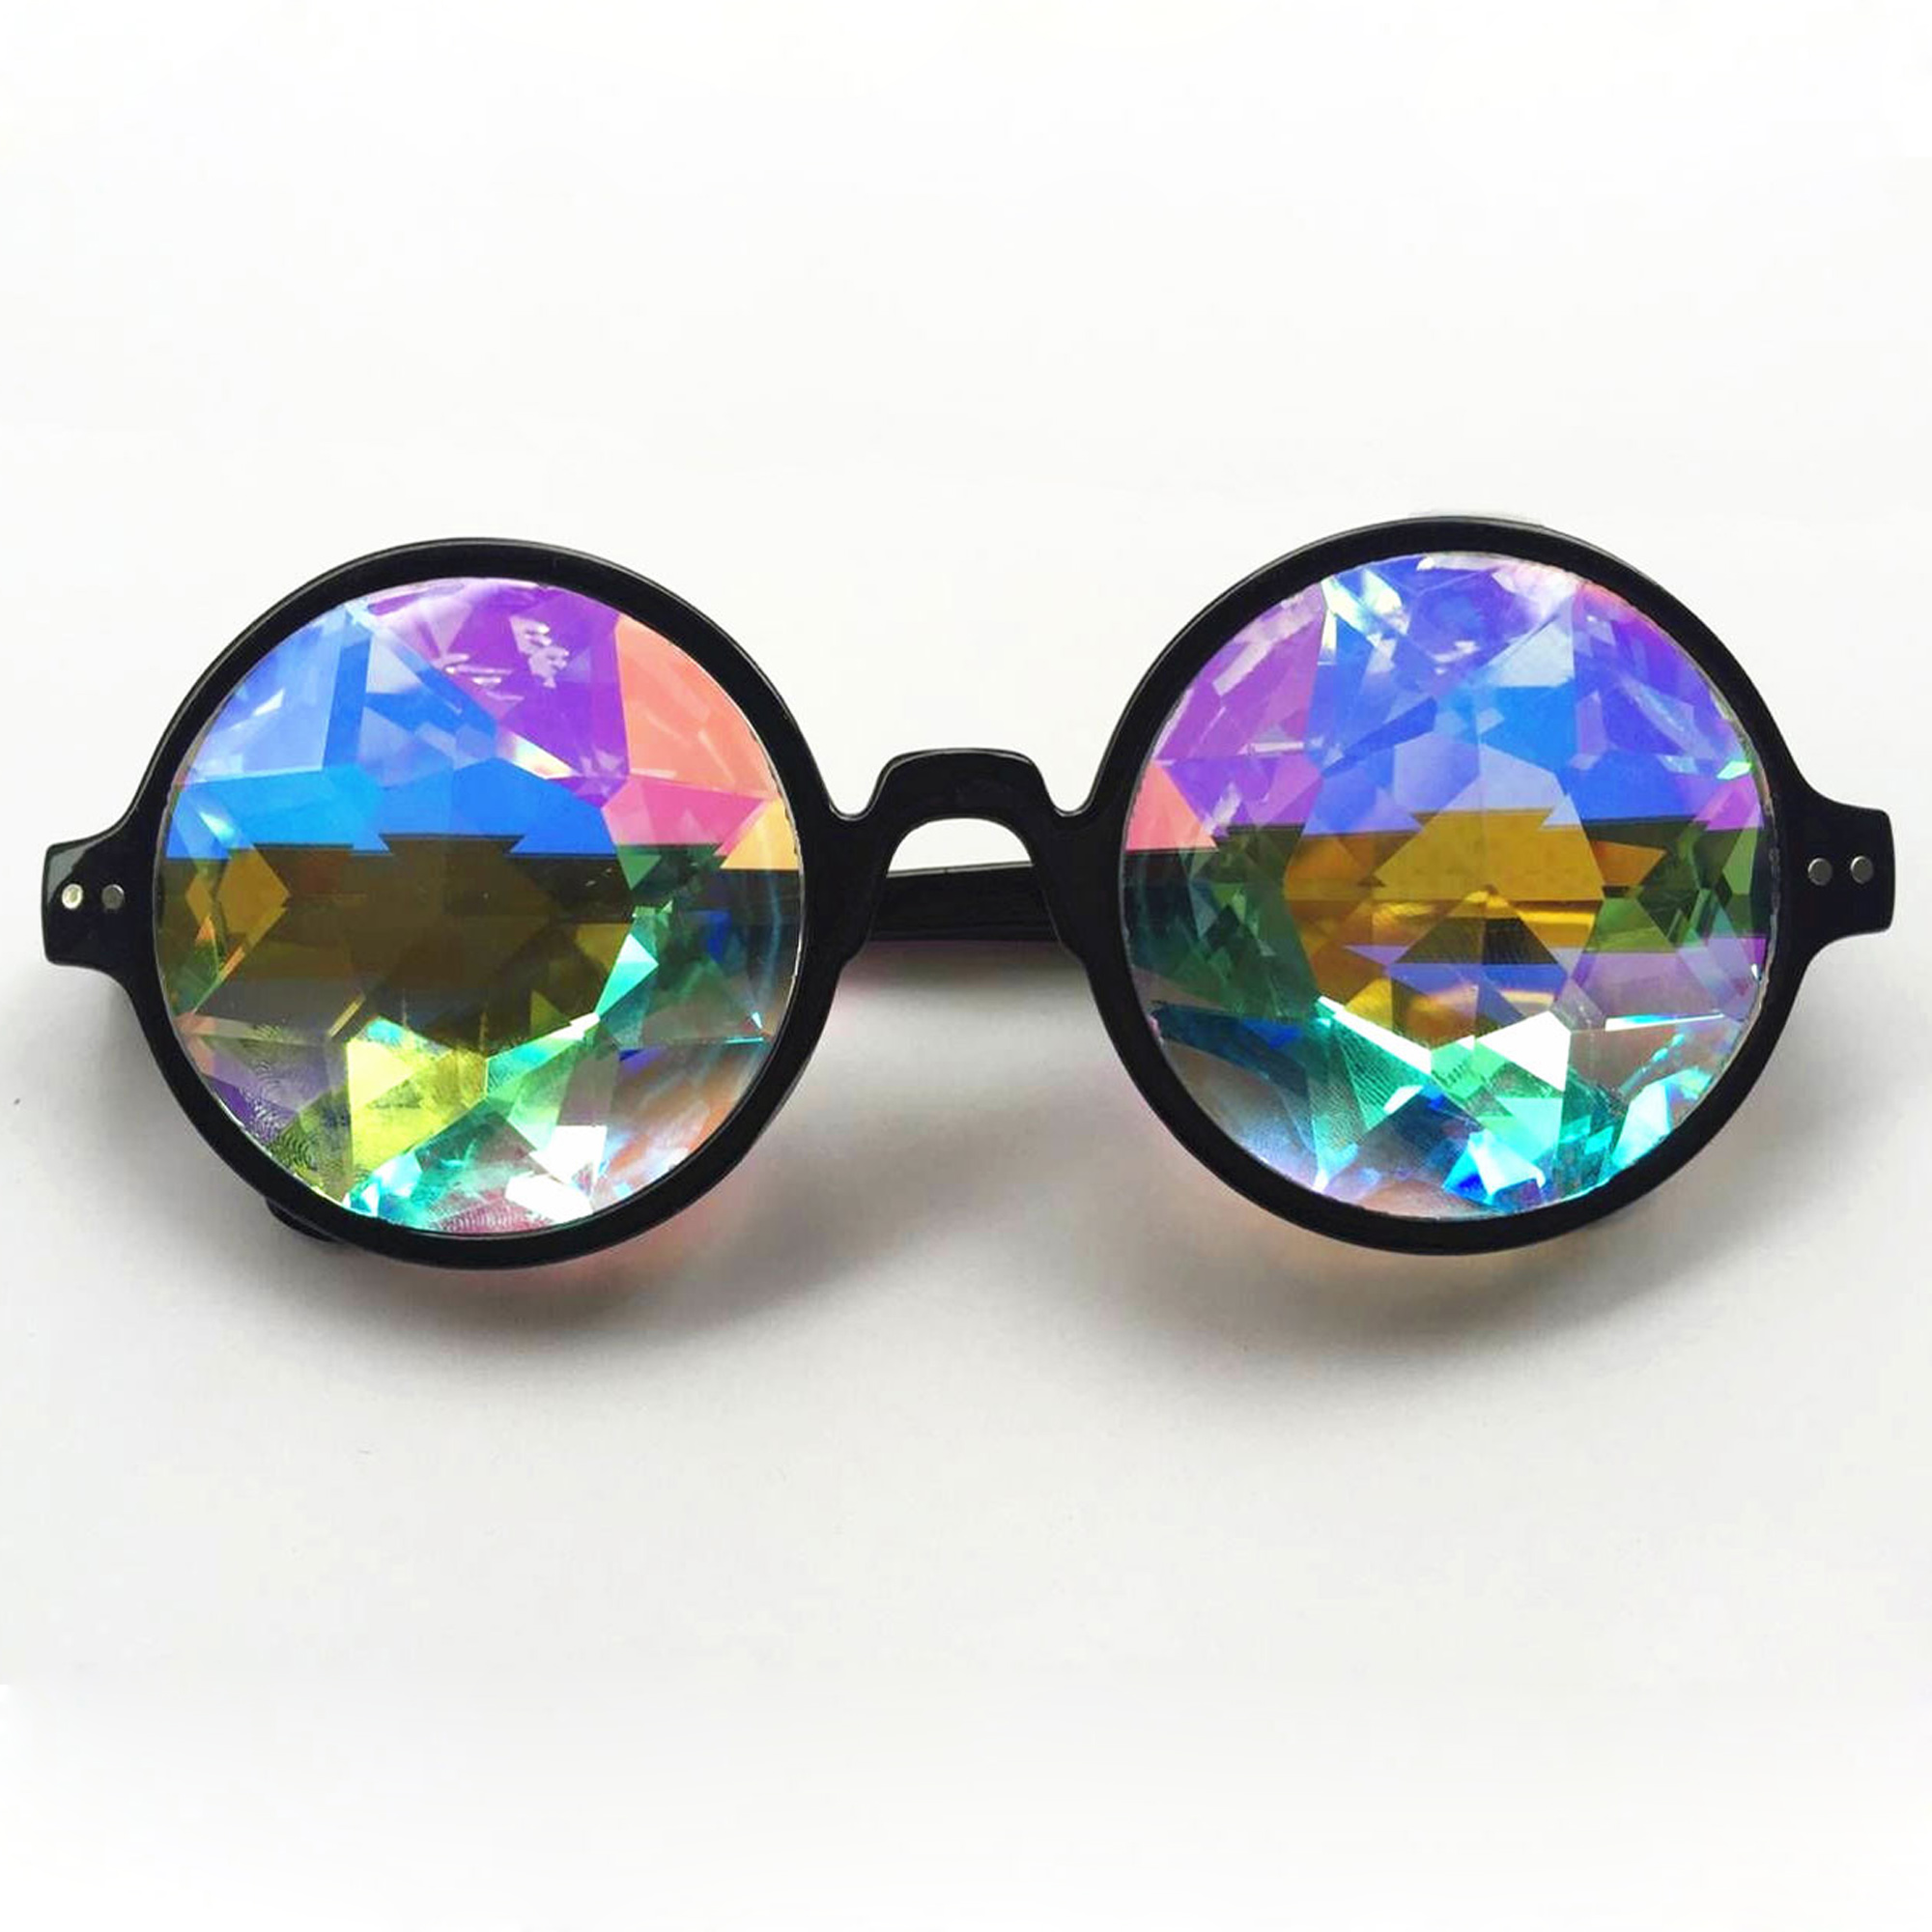 SAYFUT 2Packs Goggles Rainbow Kaleidoscope Glasses Prism Sunglasses Festival Diffraction Goggles Cosplay Black Pink Clear - image 1 of 5